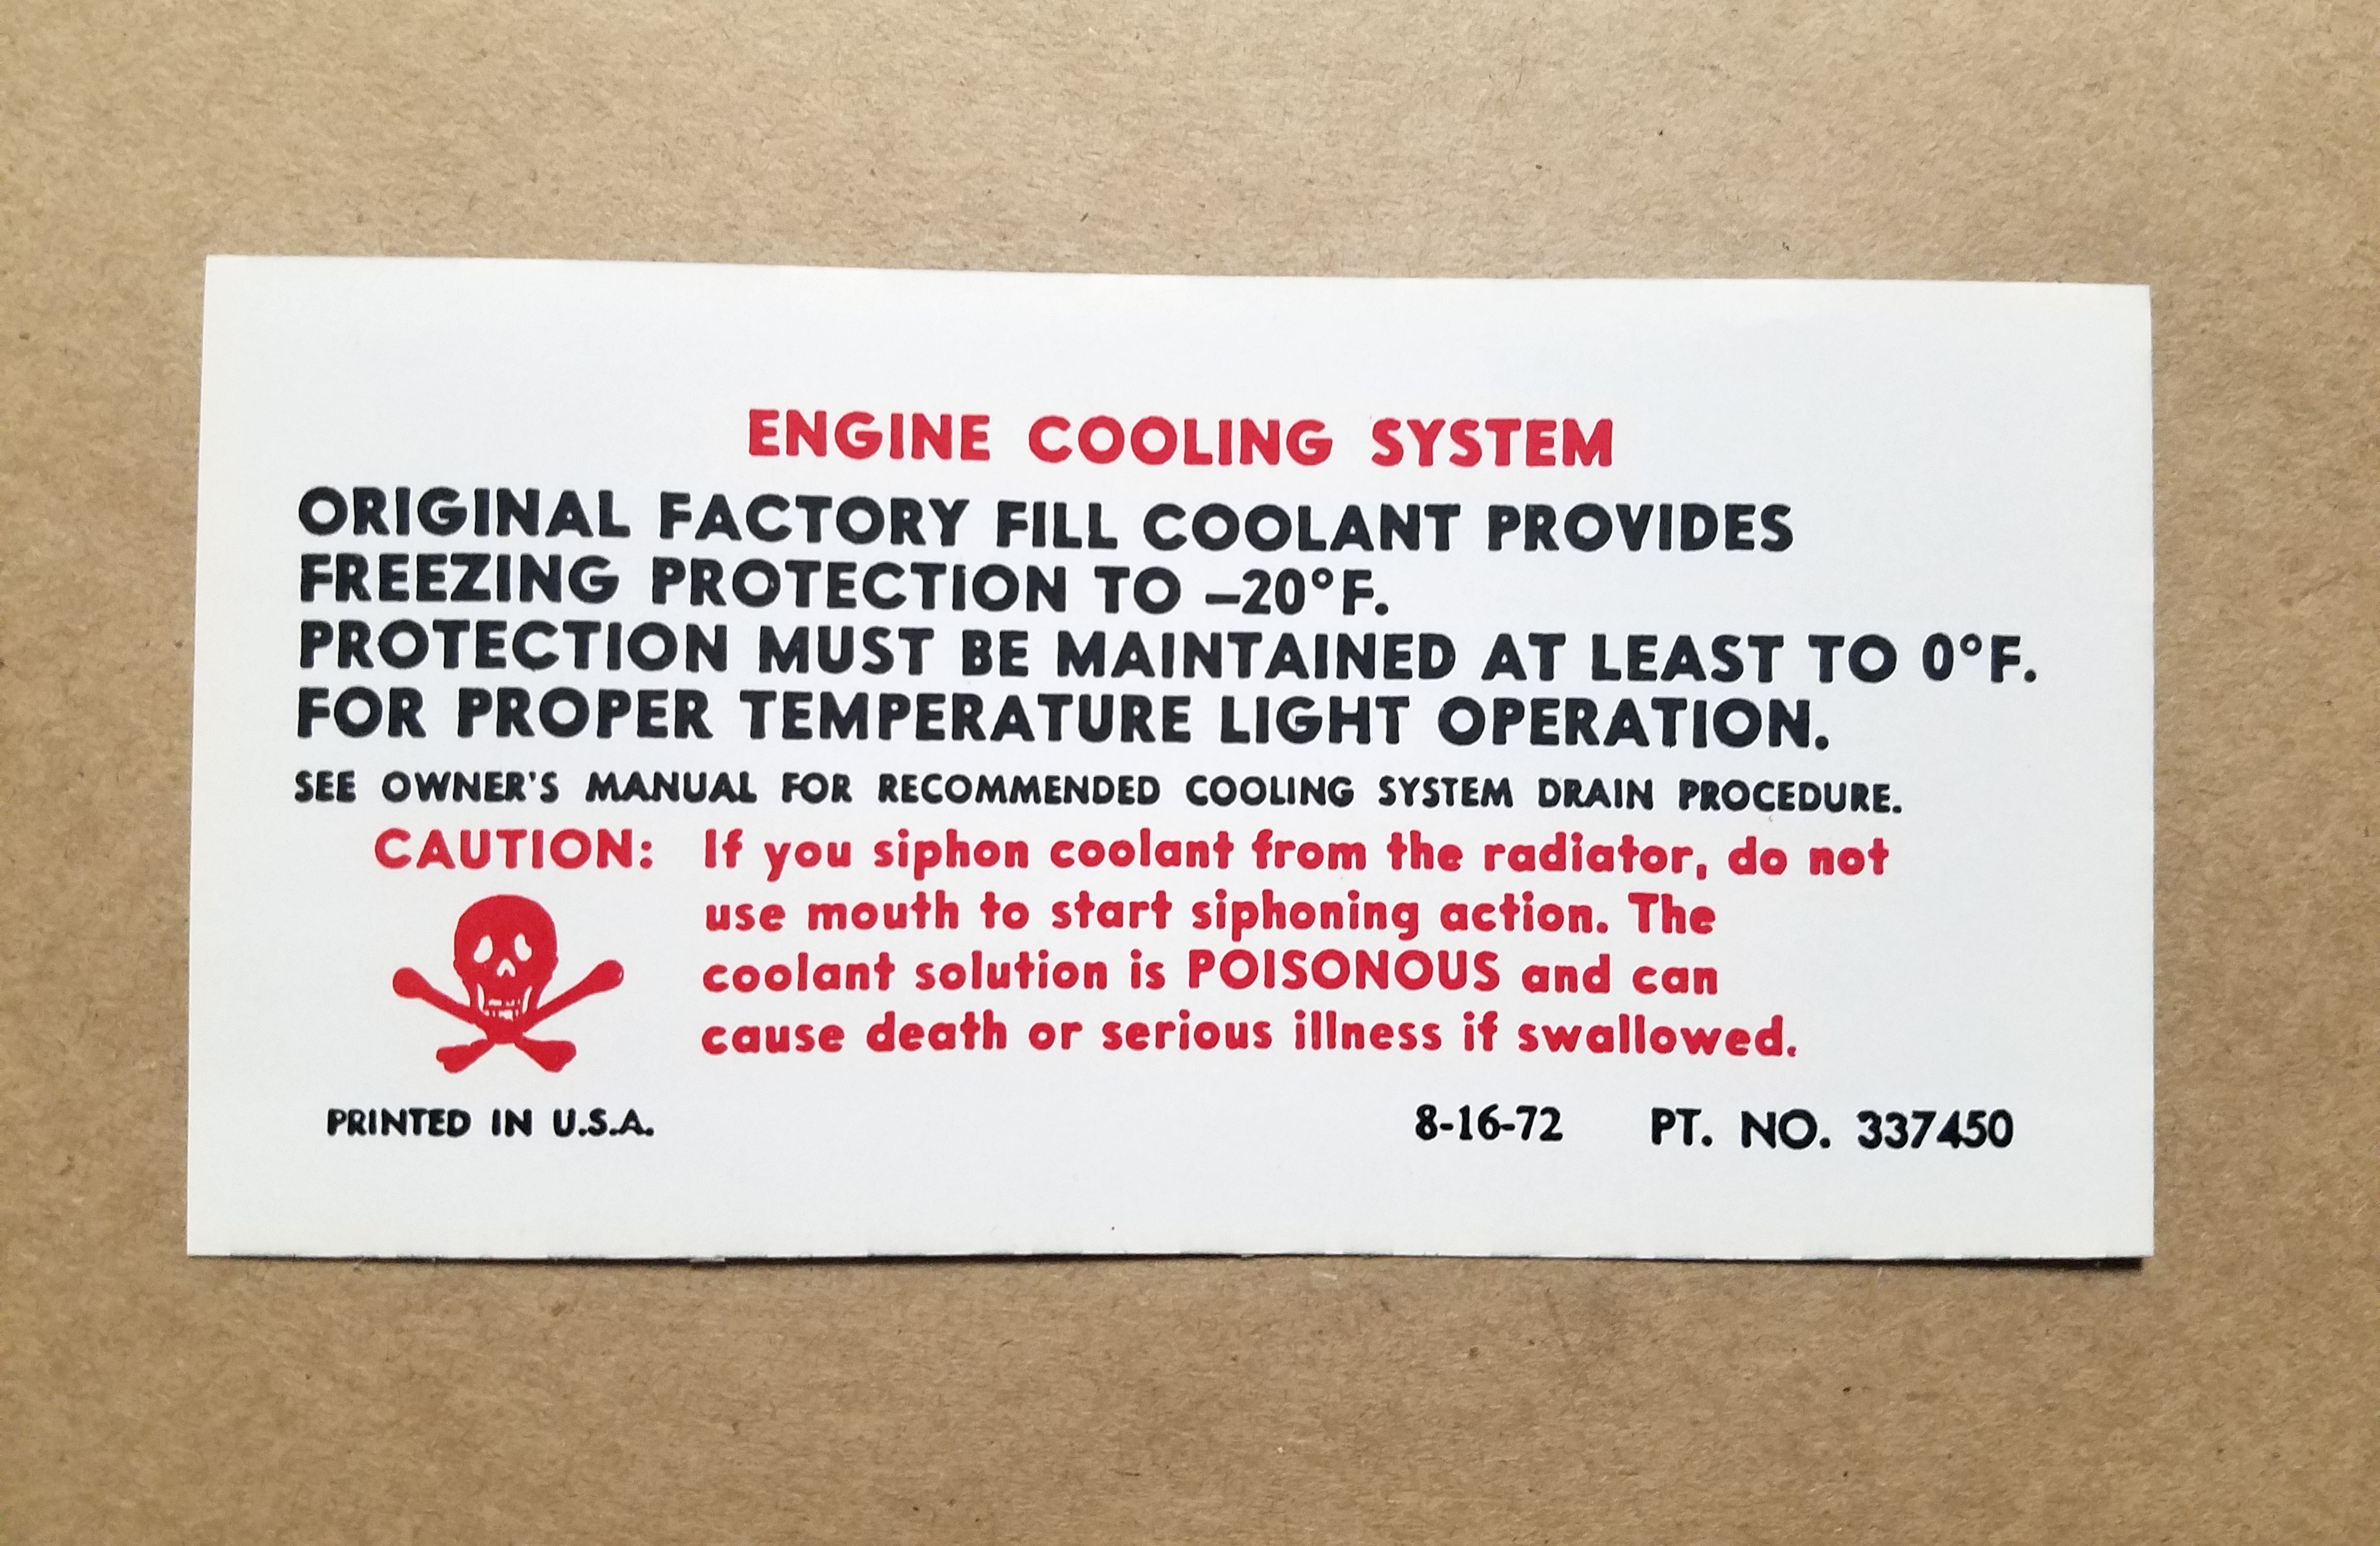 1973 Decal Engine Cooling Systems Caution